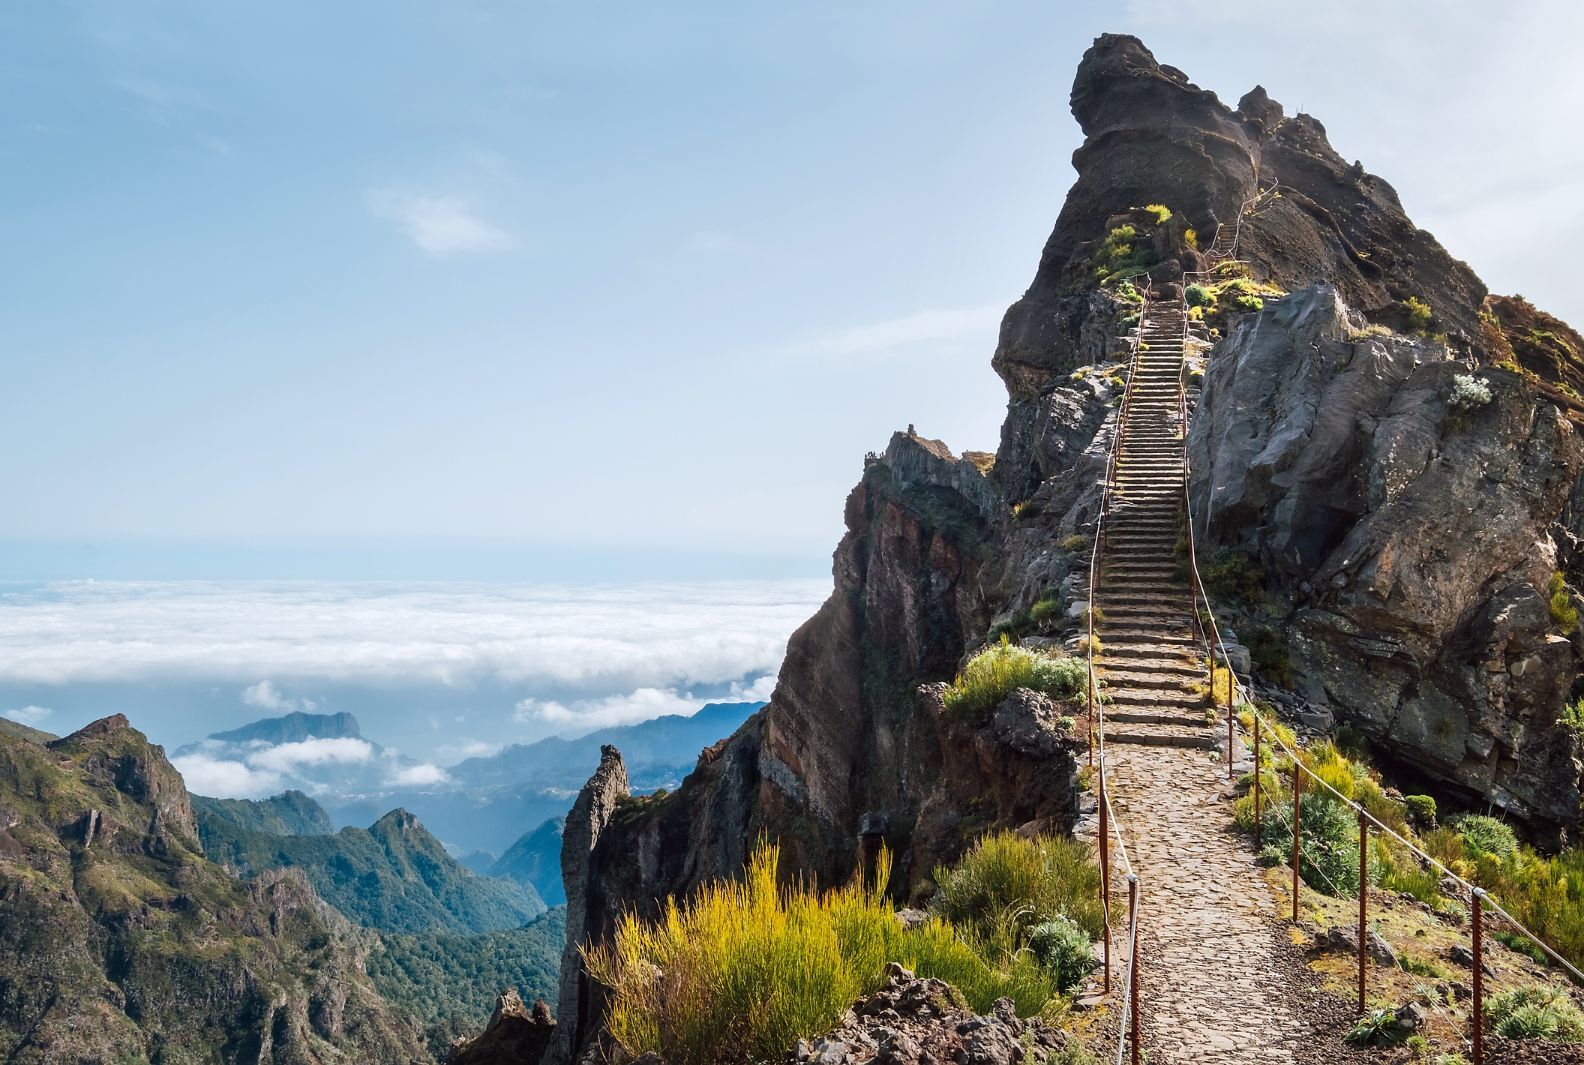 The staircase to heaven, otherwise known as Pico Ruivo, the highest point on Madeira. Photo: Getty